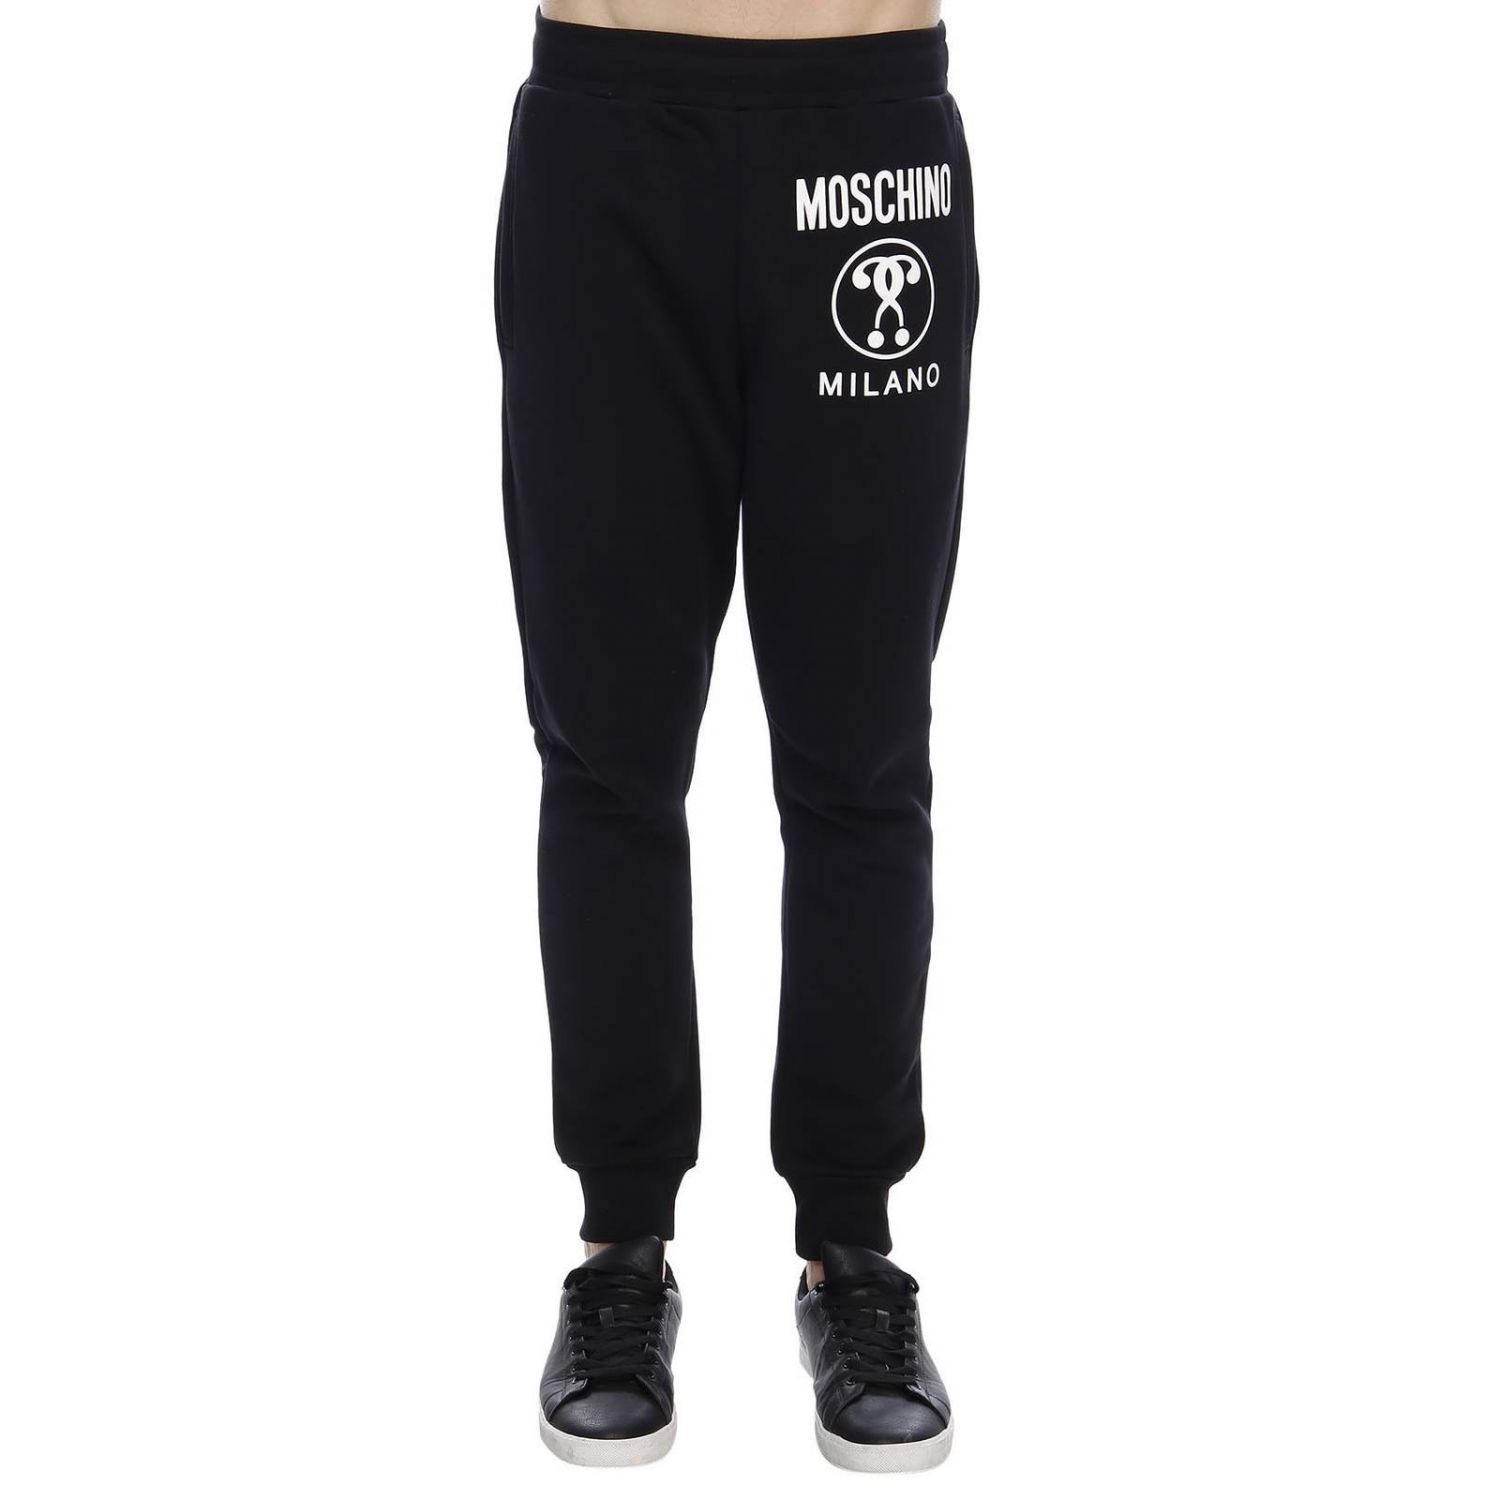 Moschino Couture Outlet: Pants men - Black | Pants Moschino Couture ...